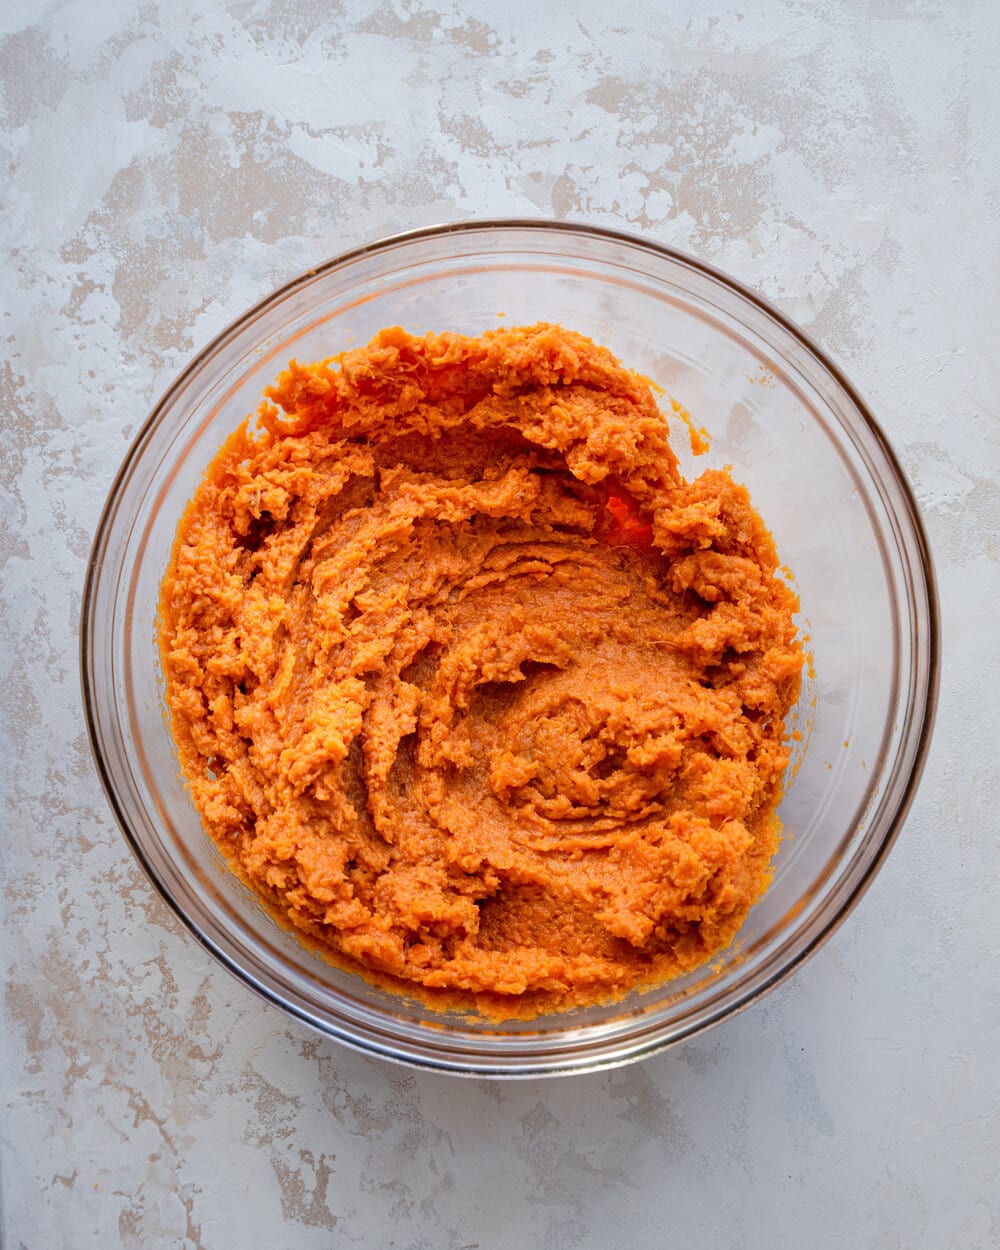 Mashed sweet potatoes in a glass bowl.